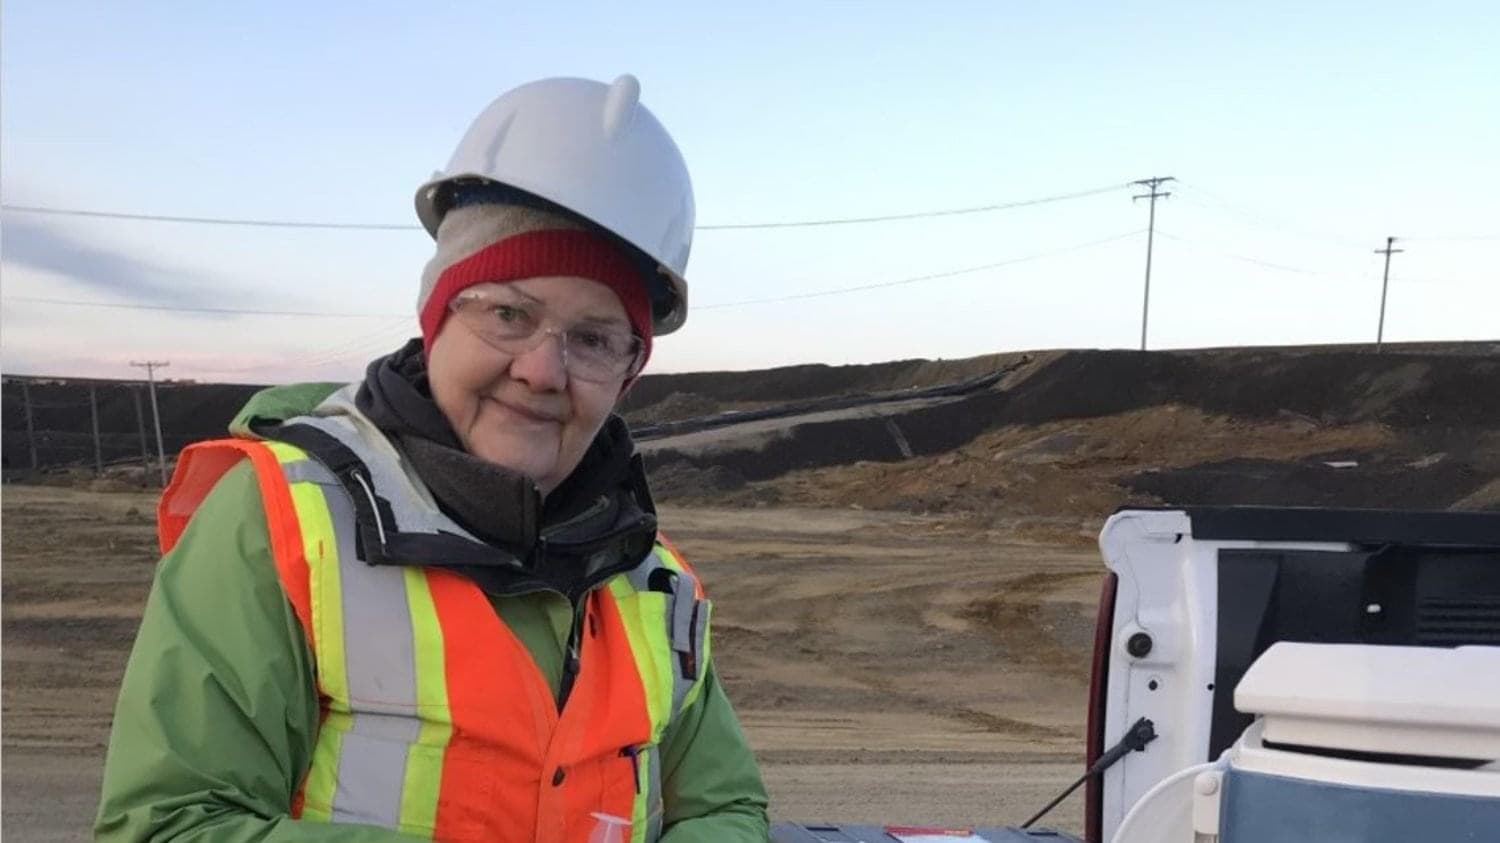 A woman standing at the back of a white truck with its tailgate down. She is wearing a hard hat, a reflective vest, glasses and looking directly at the camera.